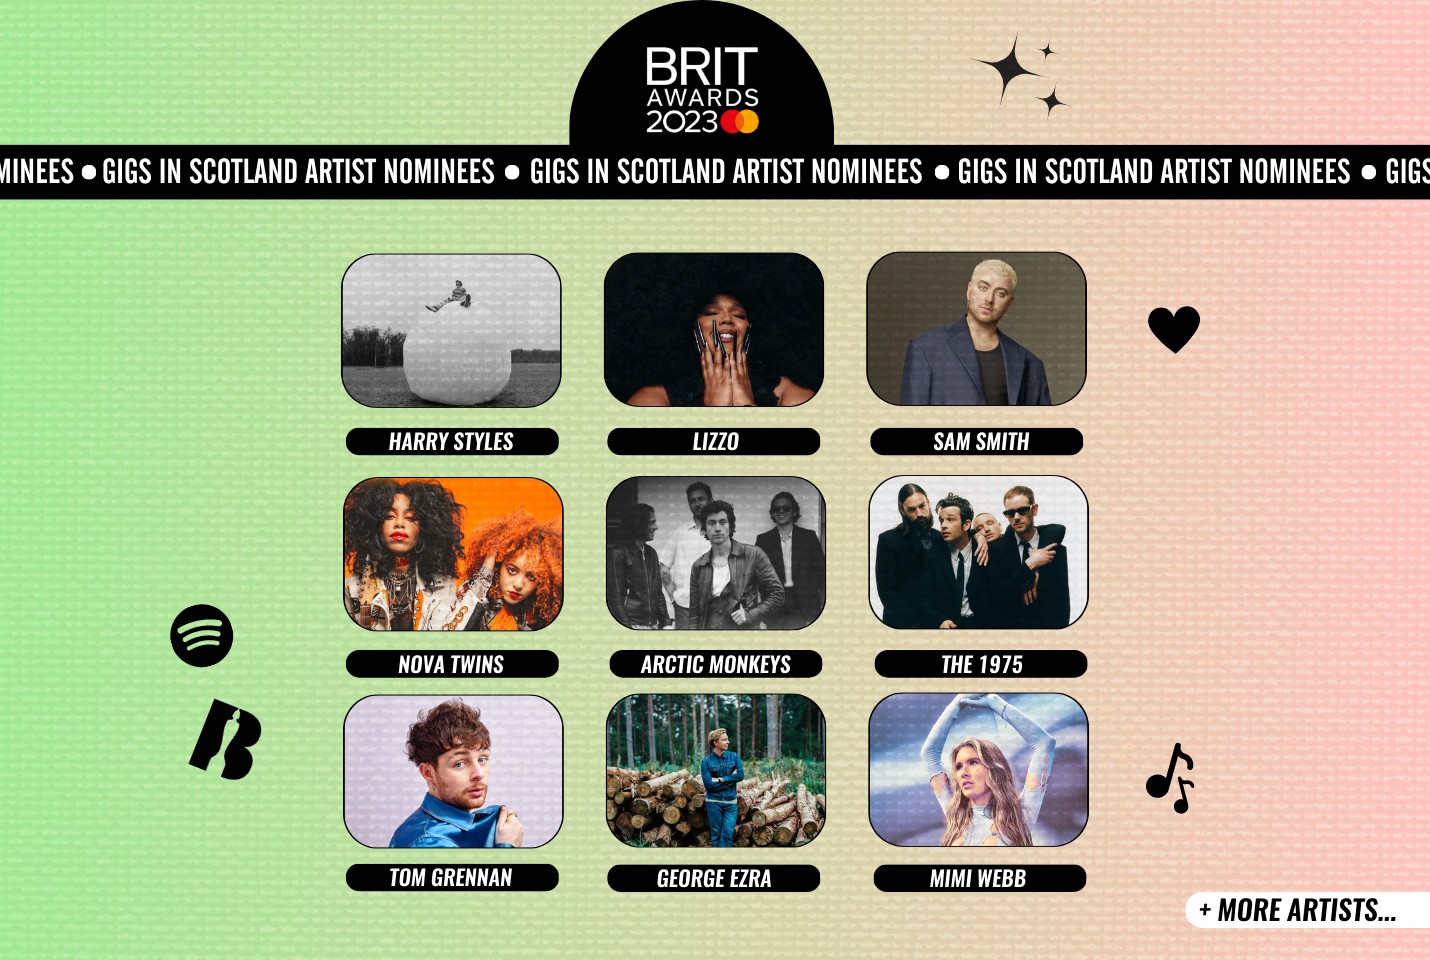 Gigs in Scotland's 2023 BRIT Award Nominees...